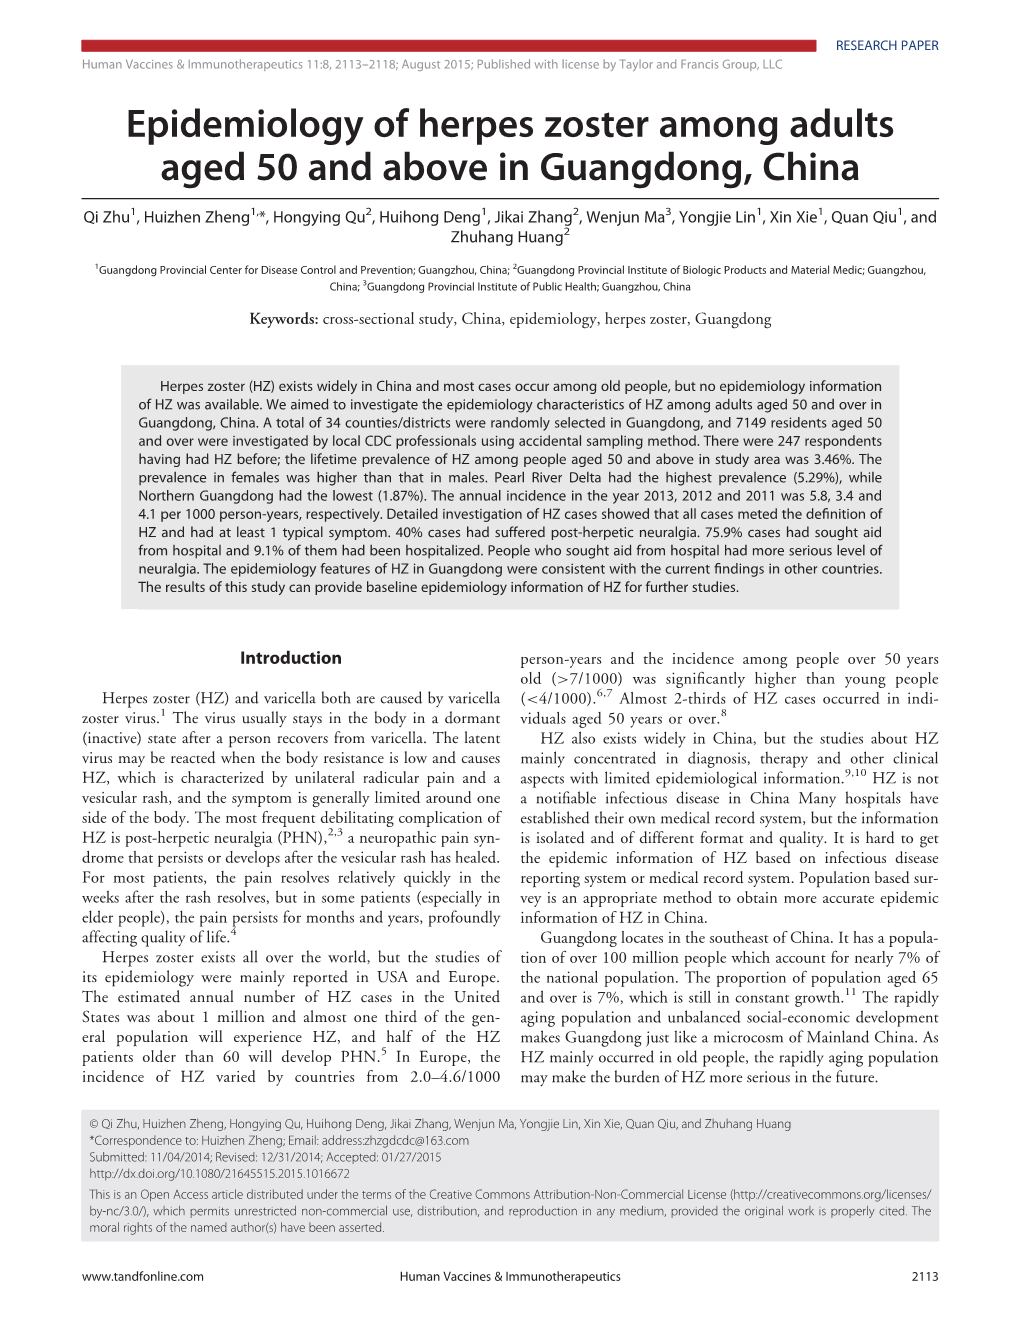 Epidemiology of Herpes Zoster Among Adults Aged 50 and Above in Guangdong, China